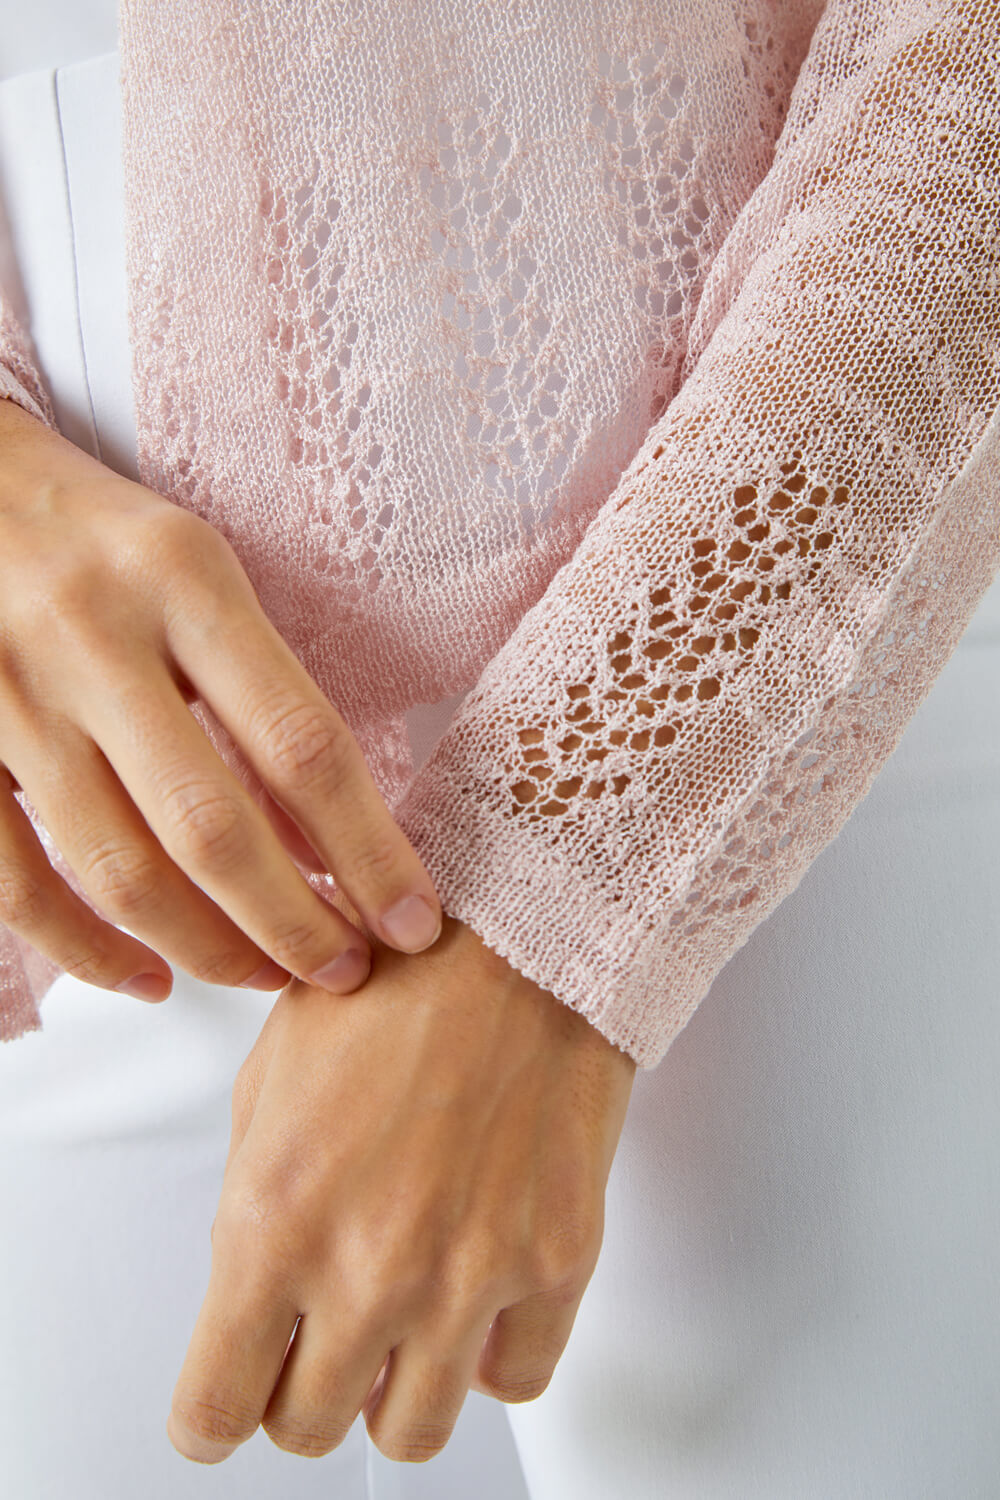 PINK Lightweight Knitted Shrug, Image 5 of 5